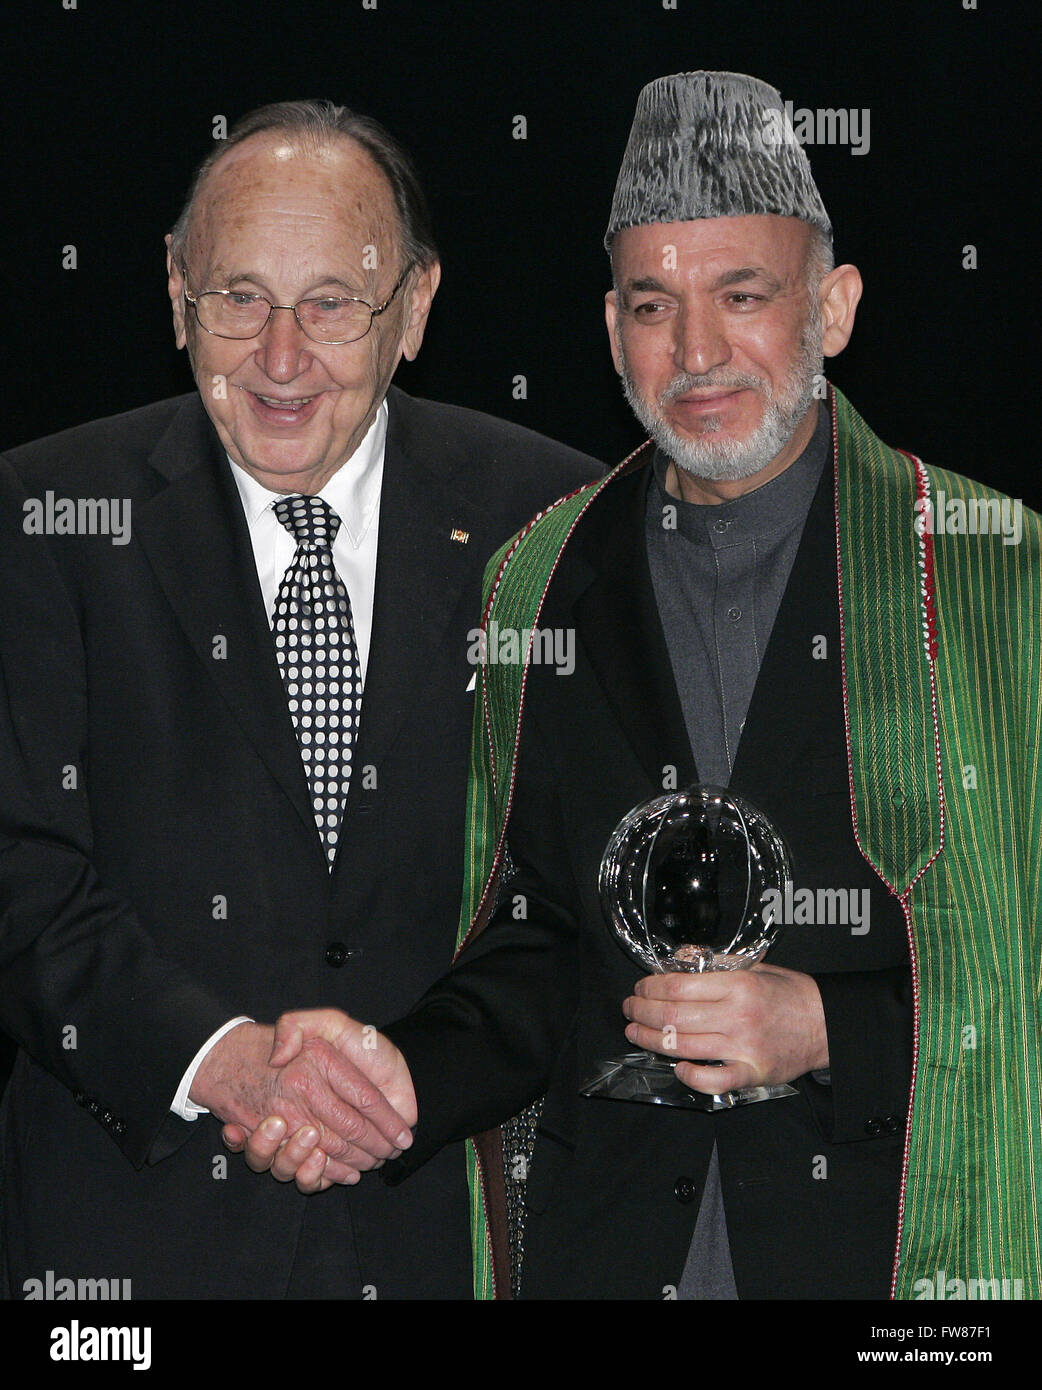 Former German foreign minister Hans-Dietrich Genscher (l) and president of Afghanistan Hamid Karsai during the Steiger Award ceremony in Bochum on 17 March 2007. Stock Photo